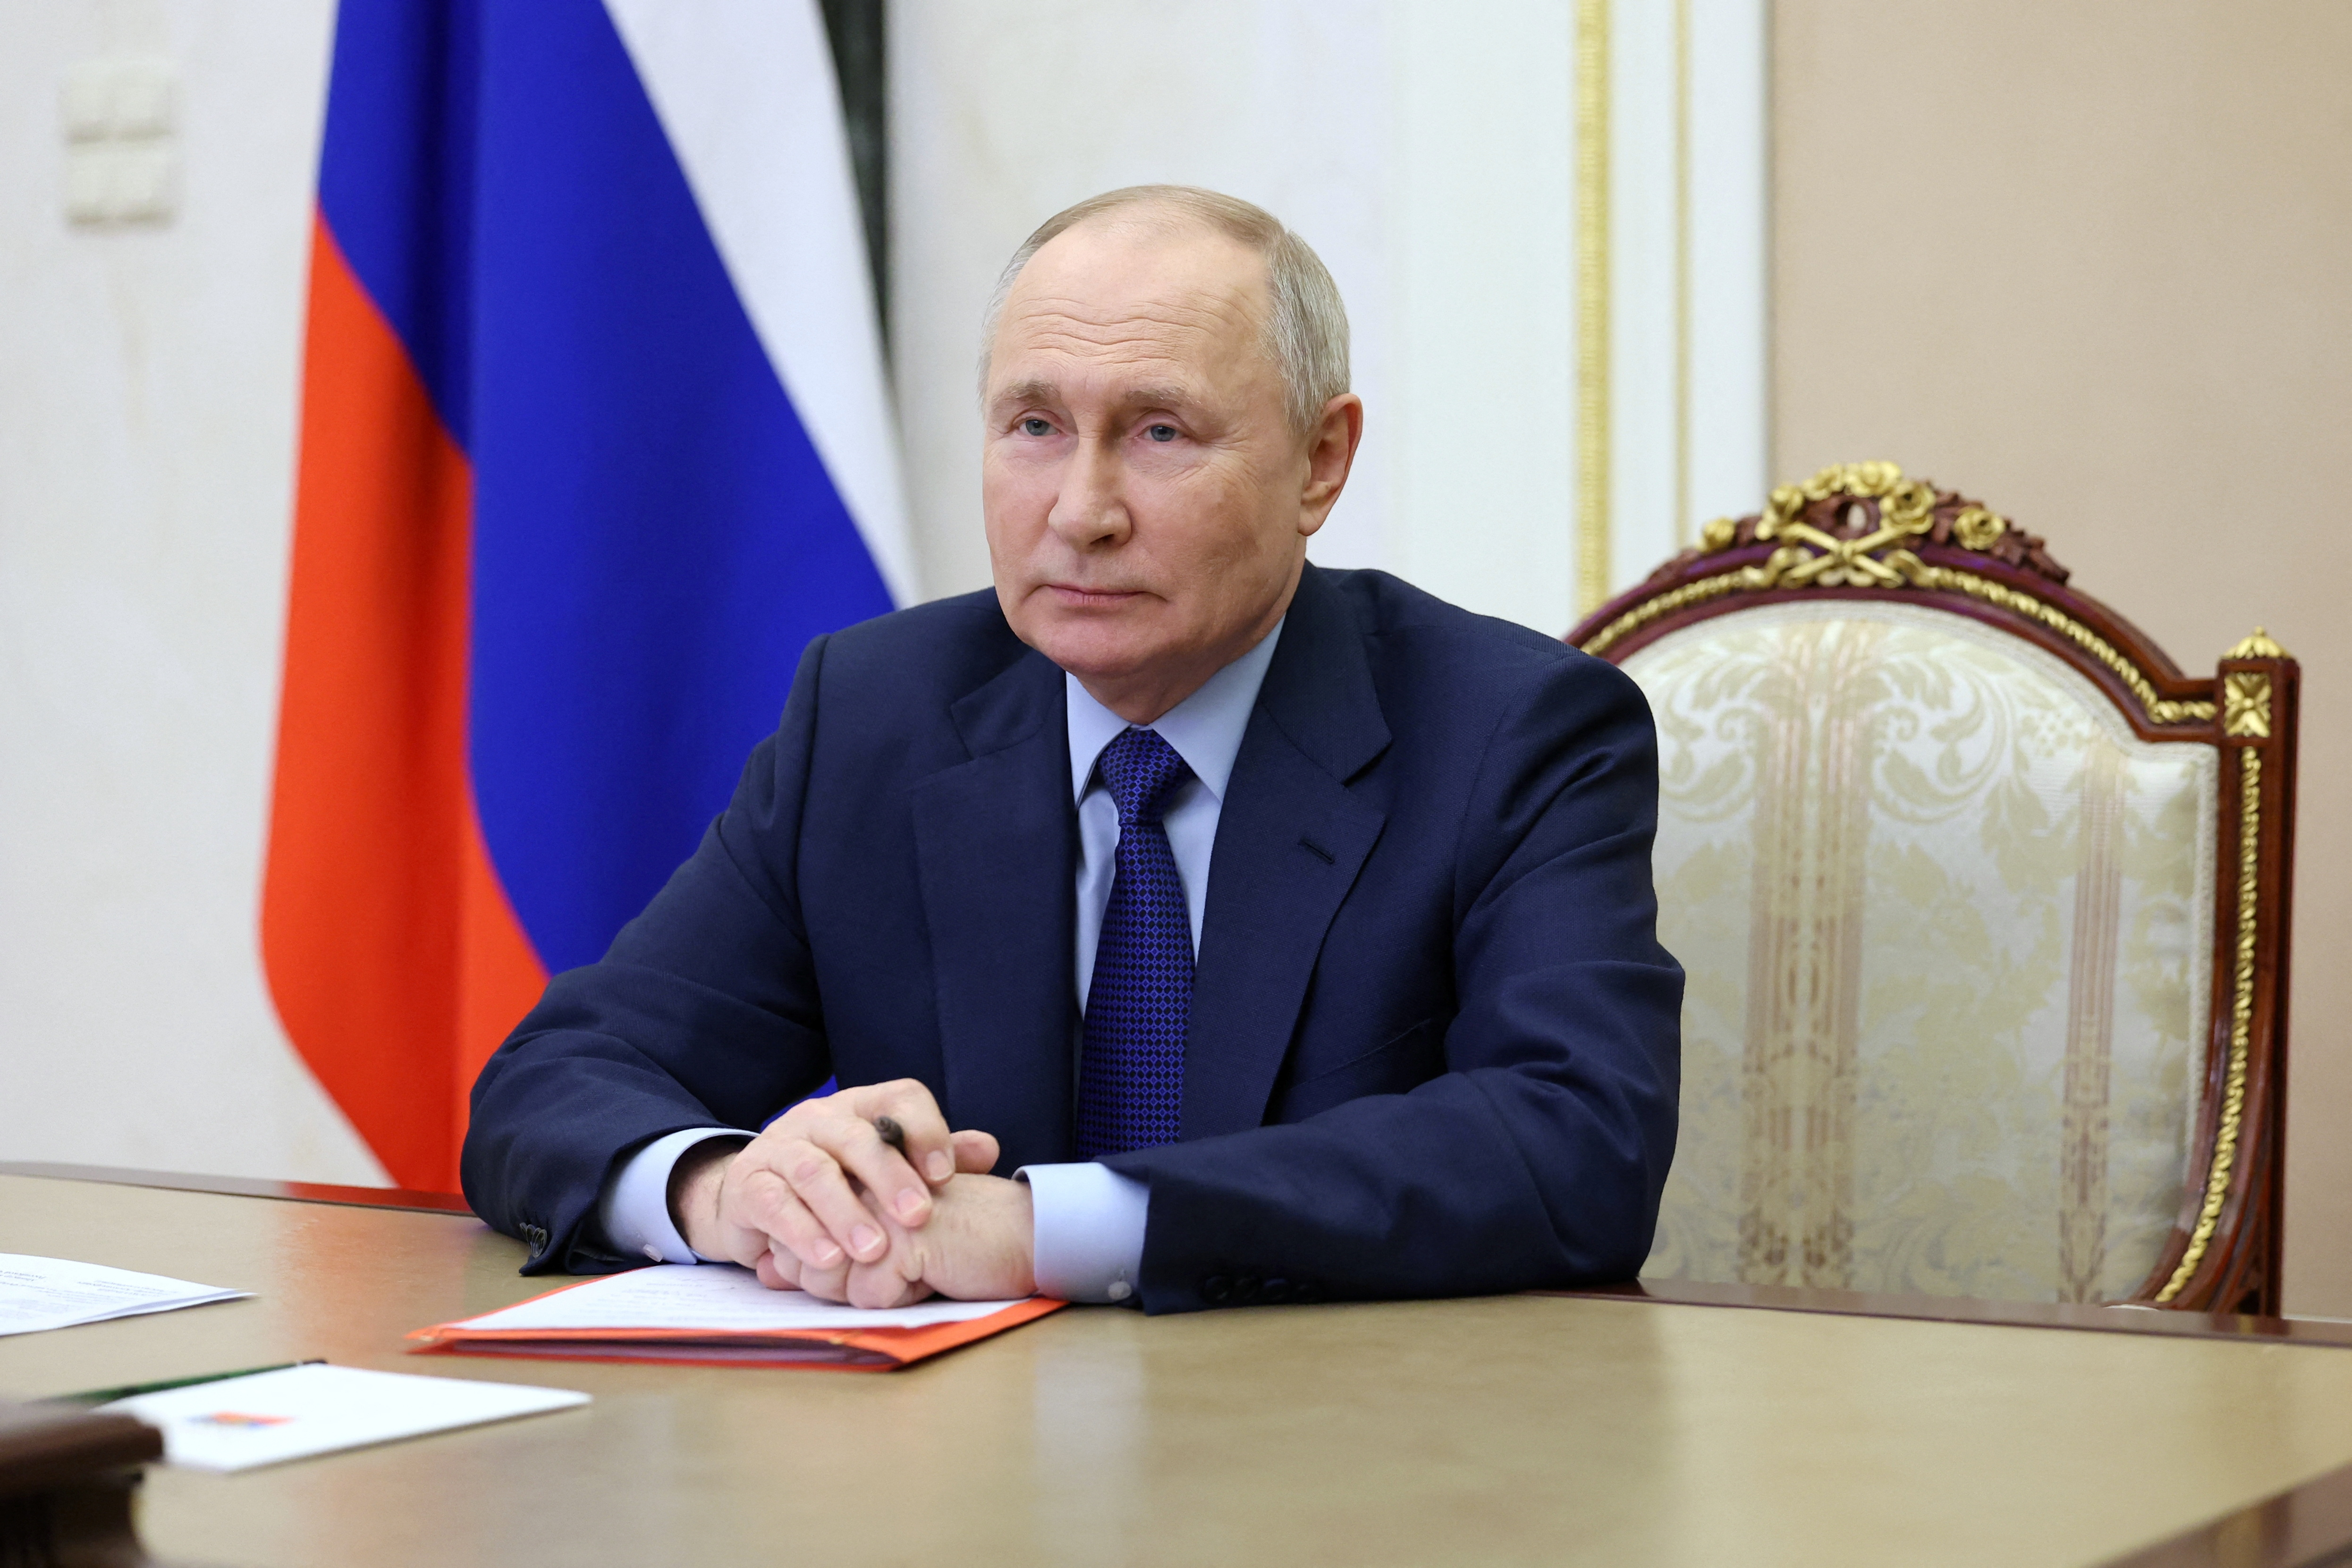 Russian President Putin chairs a meeting with members of the Security Council via video link in Moscow